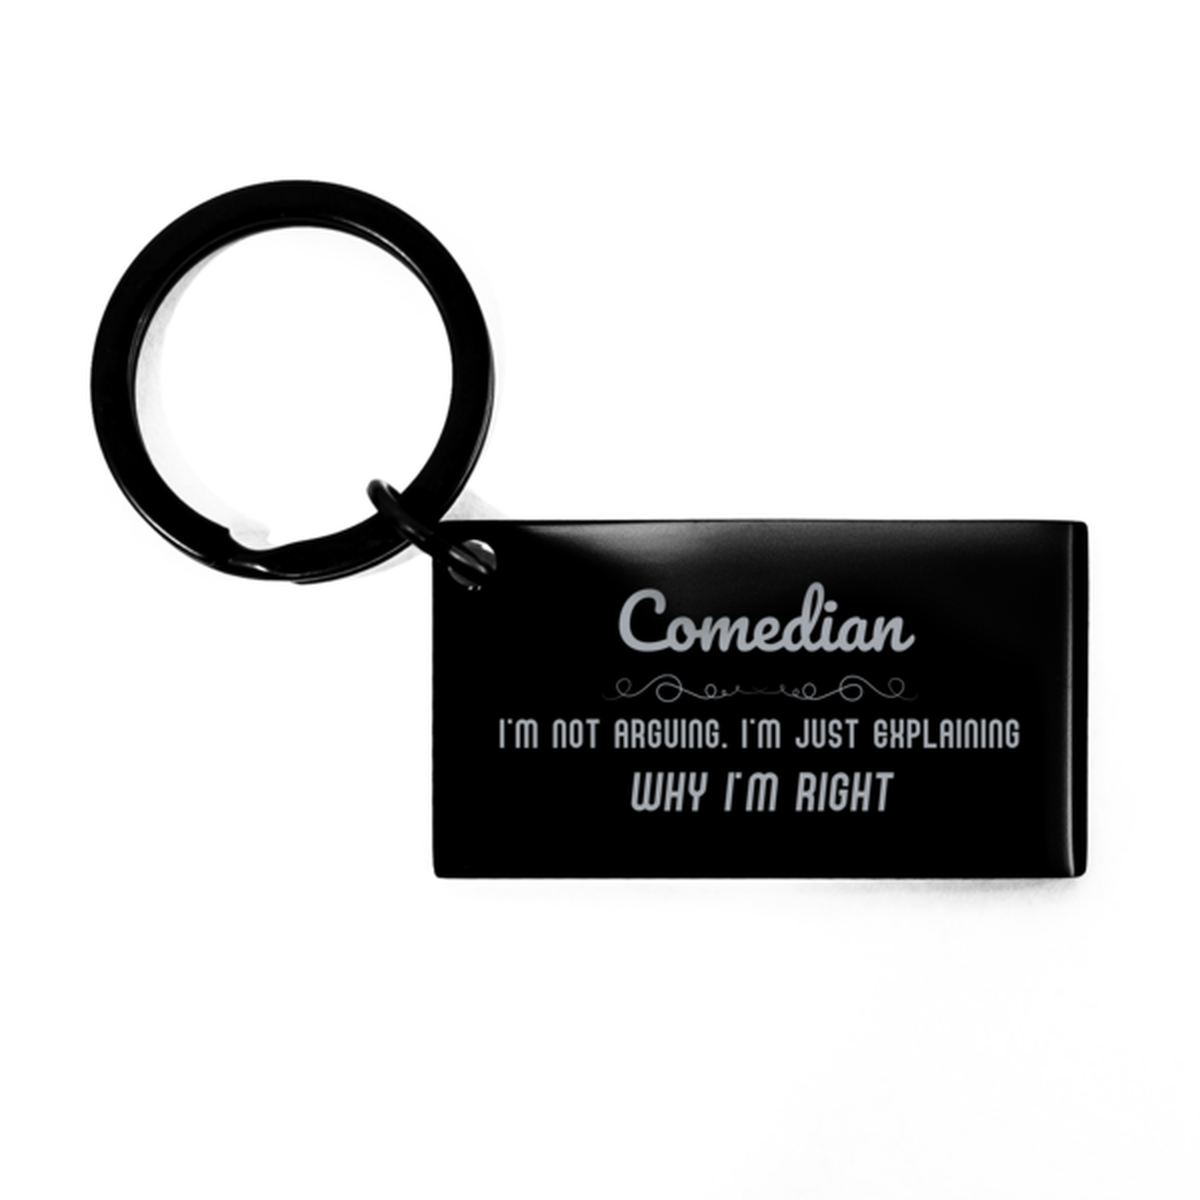 Comedian I'm not Arguing. I'm Just Explaining Why I'm RIGHT Keychain, Funny Saying Quote Comedian Gifts For Comedian Graduation Birthday Christmas Gifts for Men Women Coworker